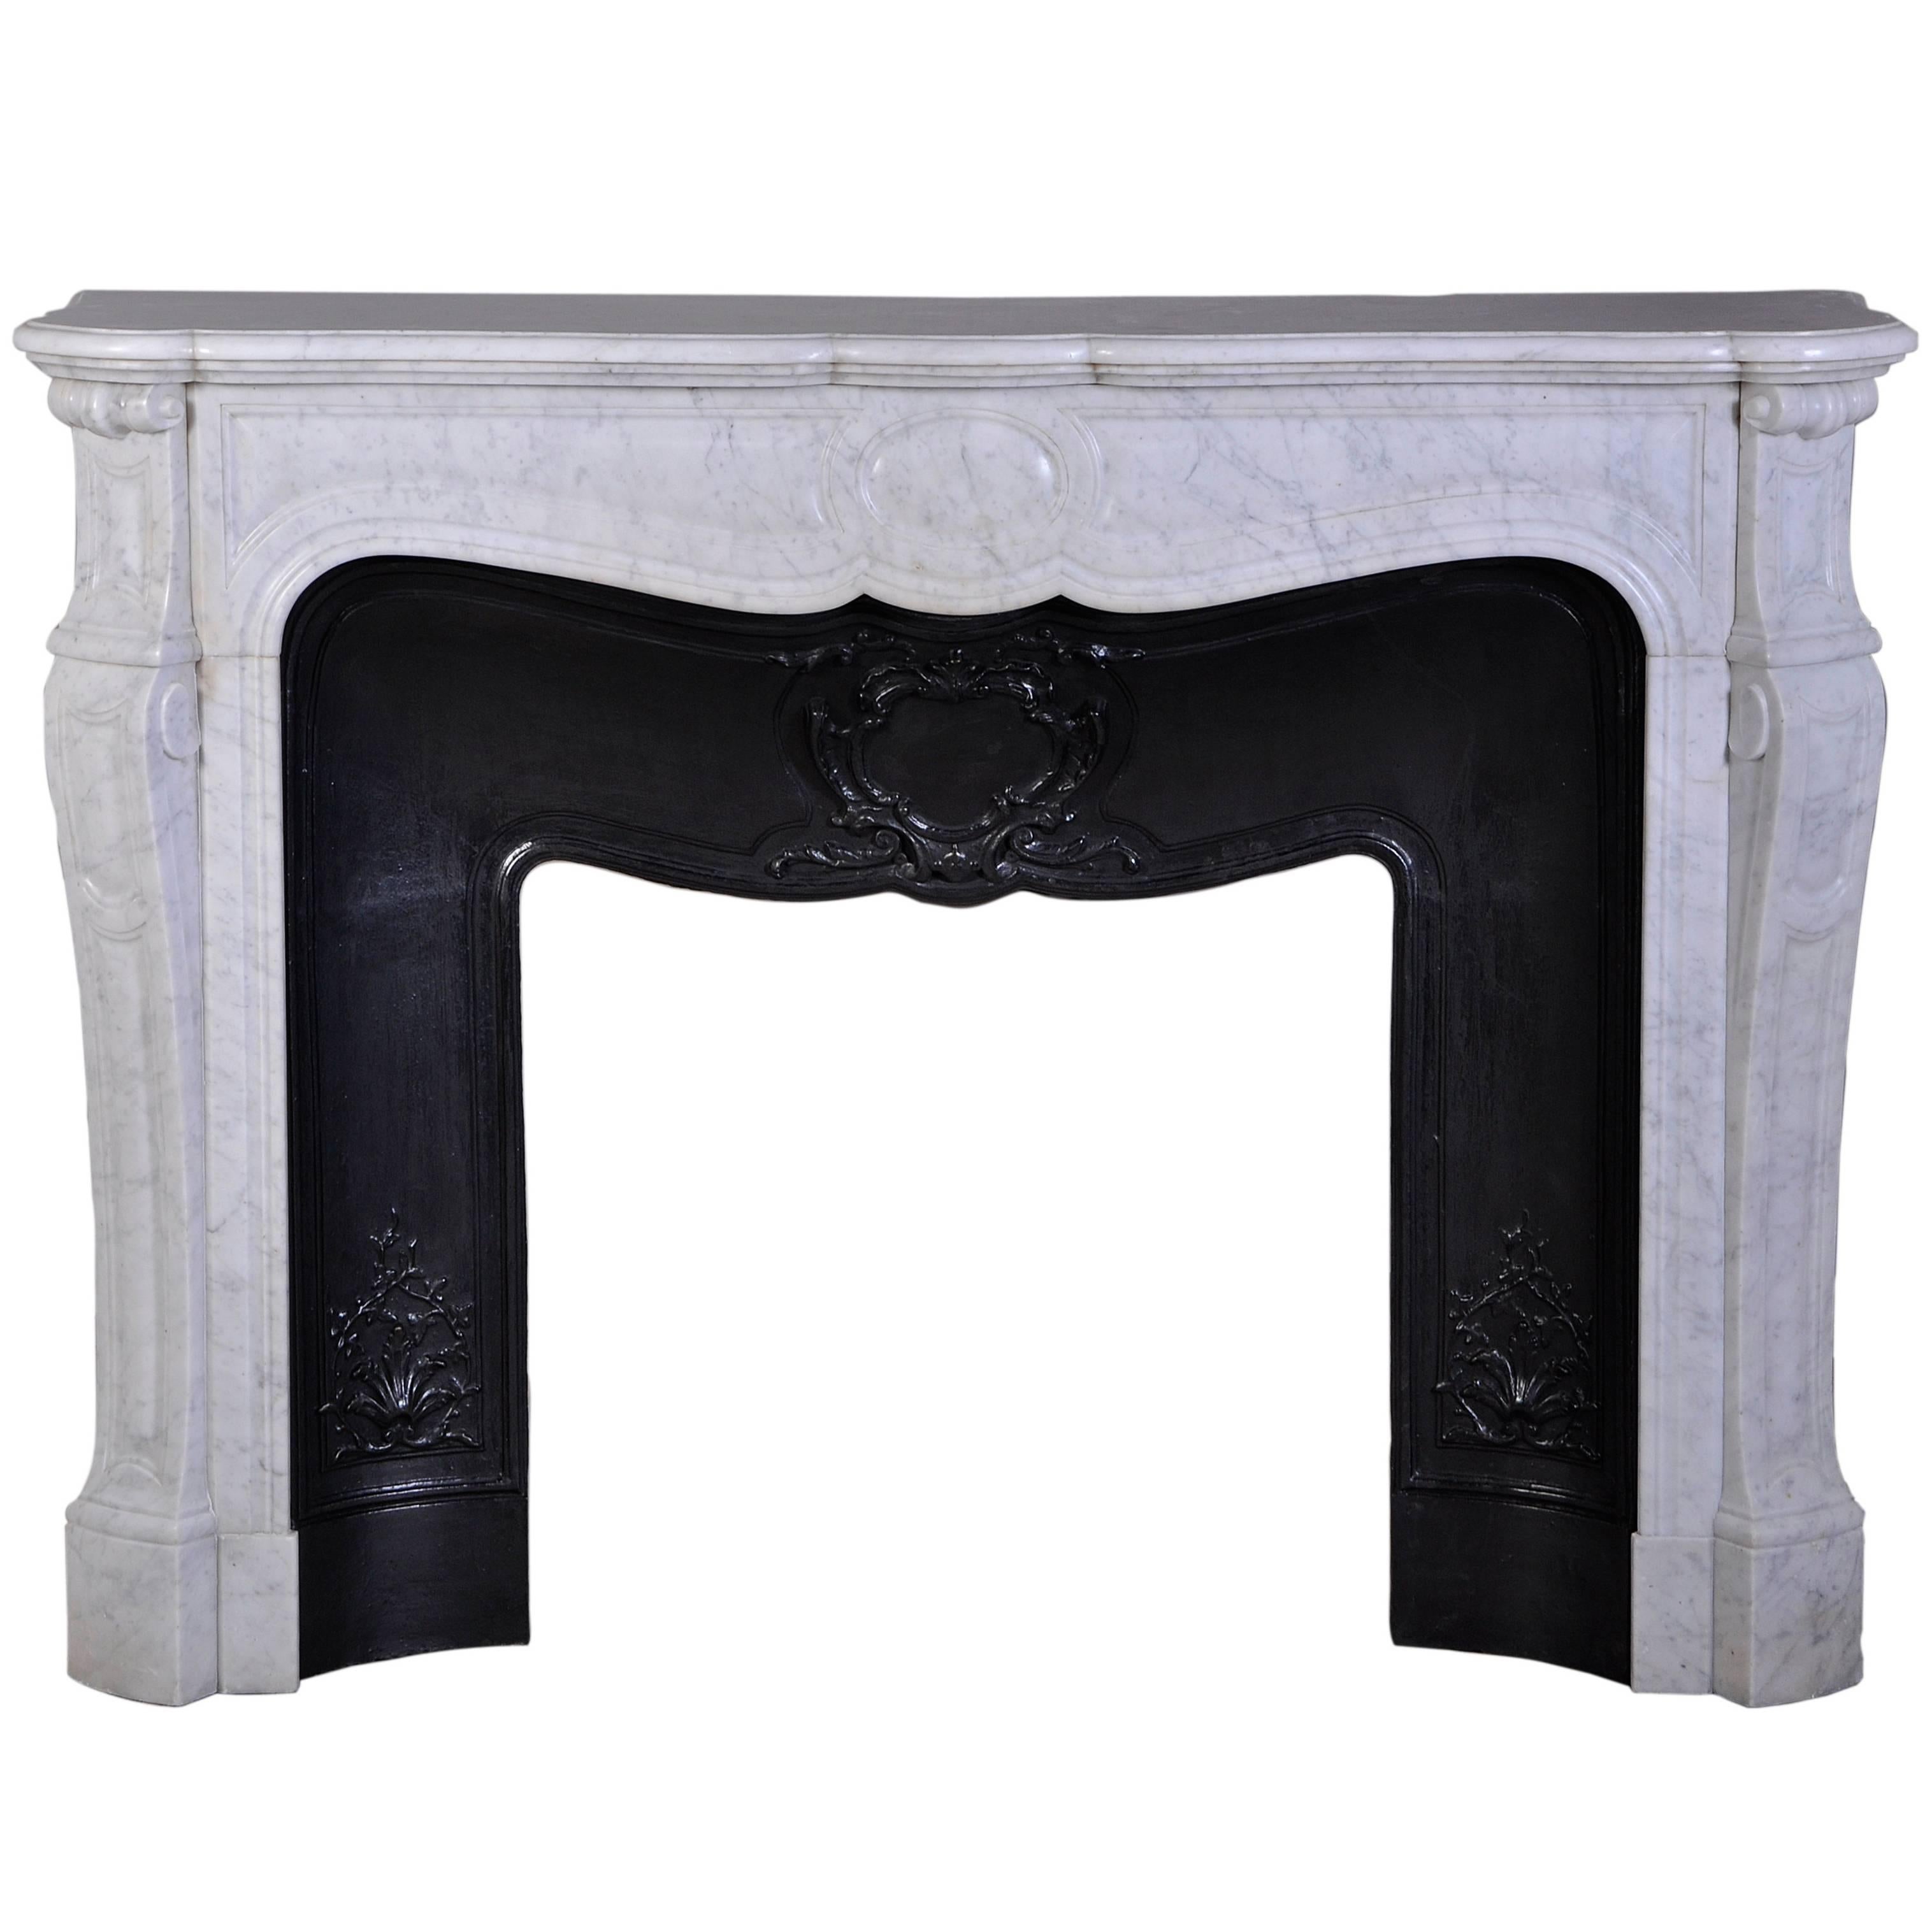 Antique Pompadour Style Fireplace, White Carrara Marble with Cast Iron Insert